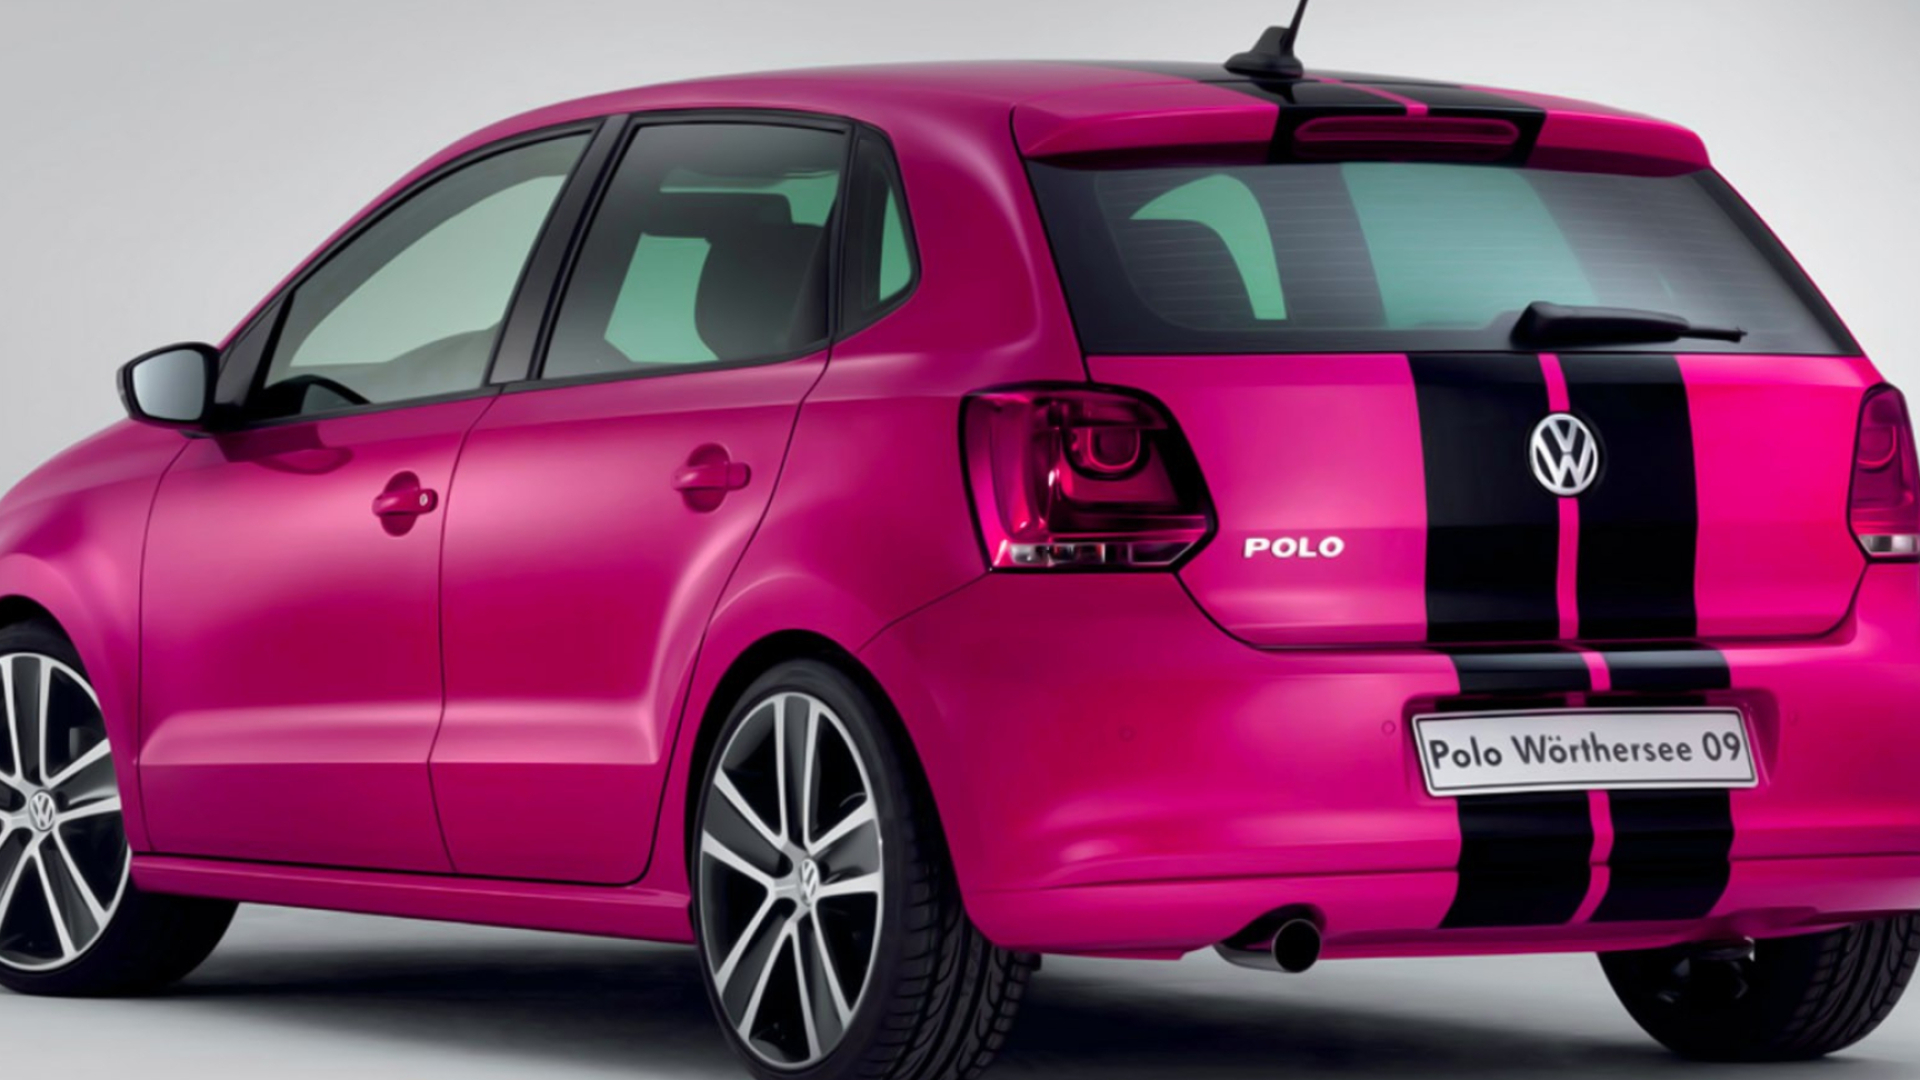 1920x1080 Pink Cars Wallpapers, Photos \u0026 Images in HD